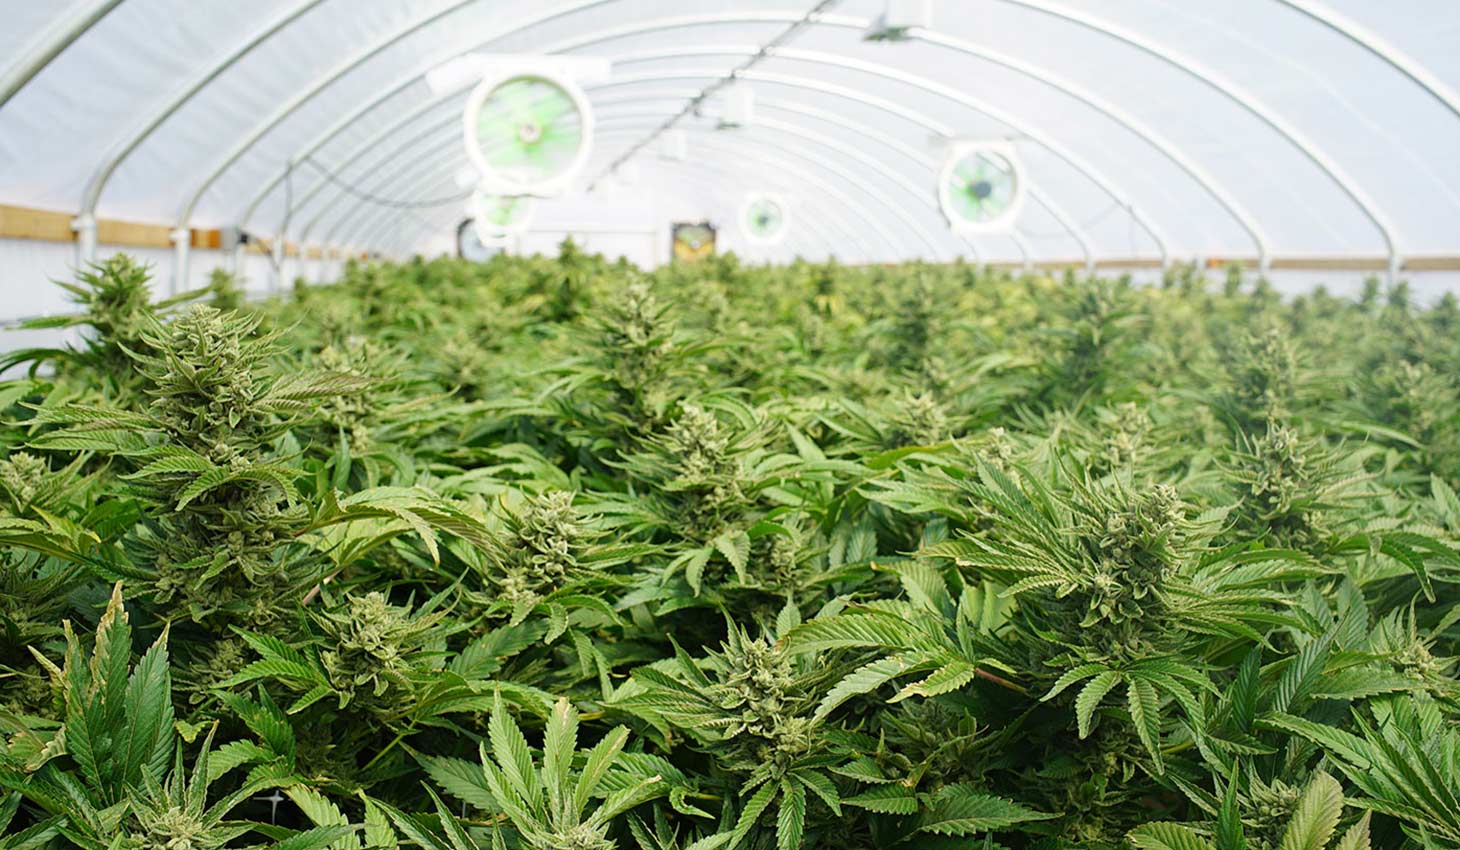 interior of greenhouse with cannabis crop